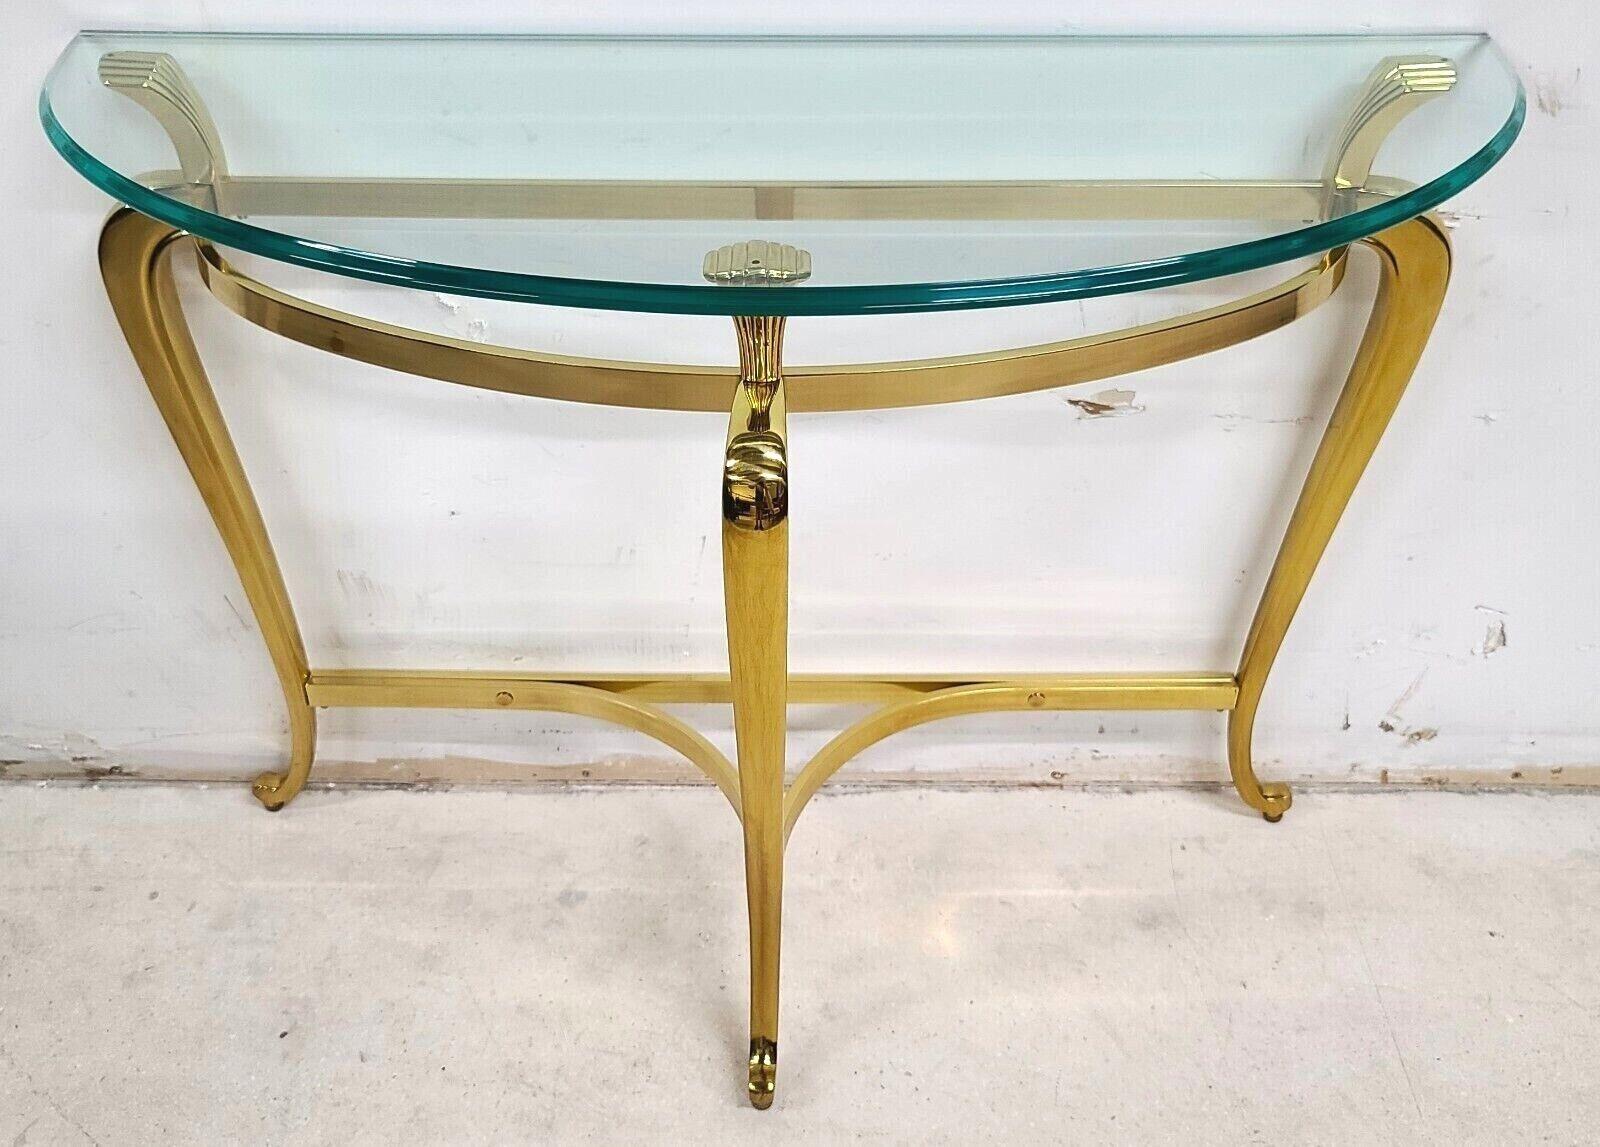 Offering One of our recent palm beach estate fine furniture acquisitions of a
Vintage Maison Jansen Regency style Demilune solid brass console table
This is a very well-made, high-end piece with Ogee edge glass and a top-quality solid (not plate)